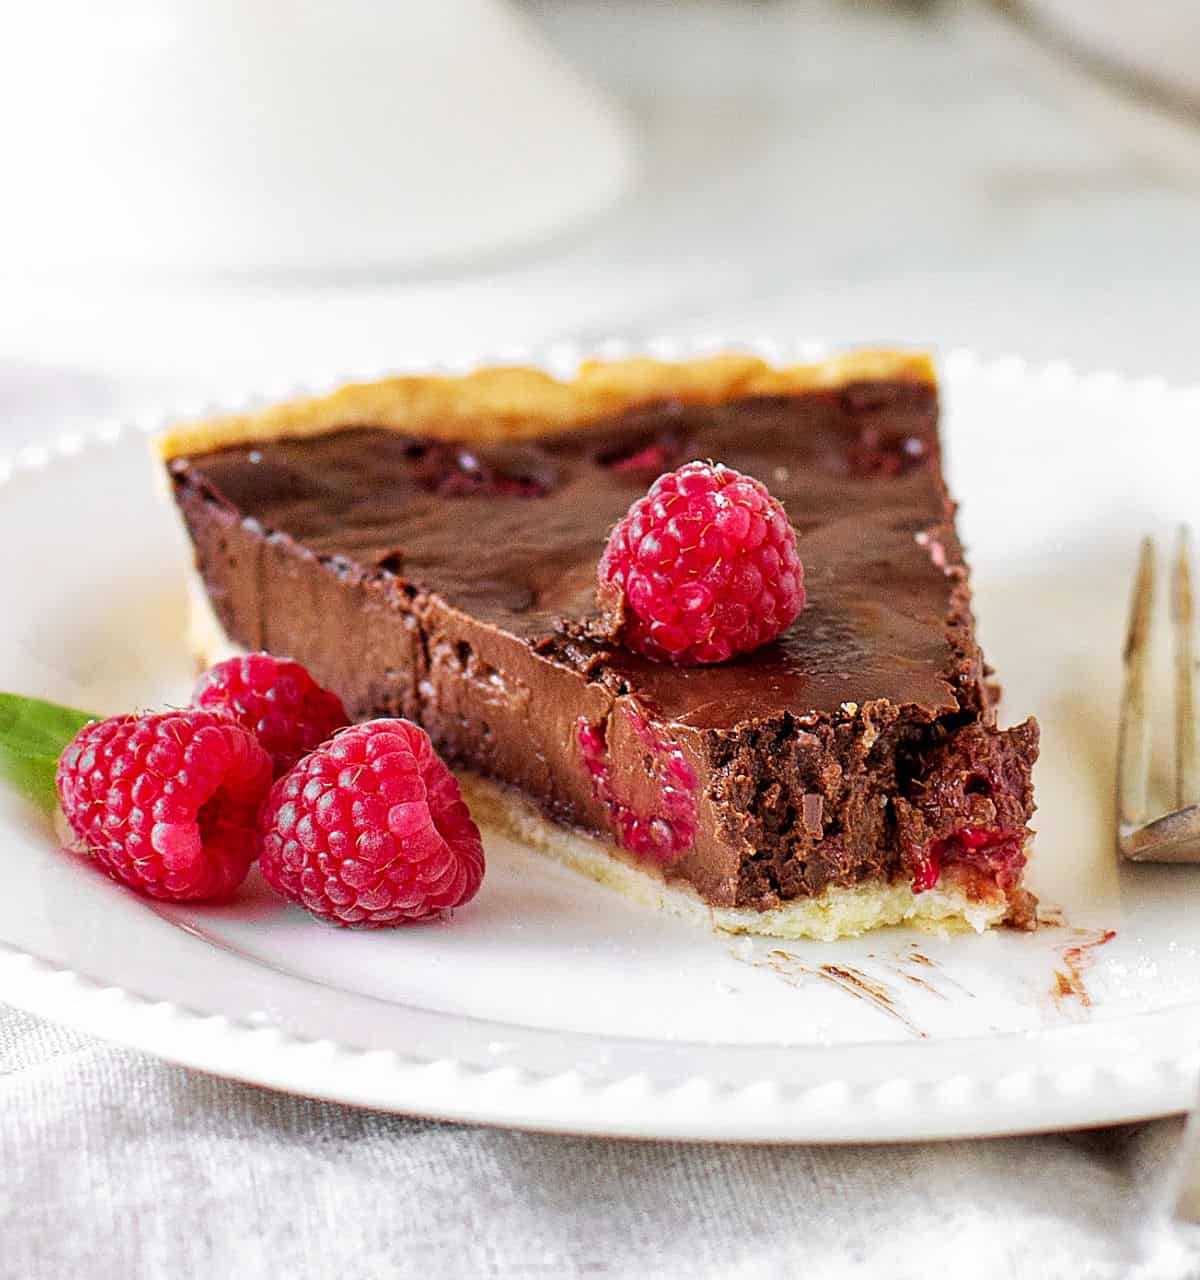 Slice of chocolate raspberry tart with missing bite, on white plate, silver fork